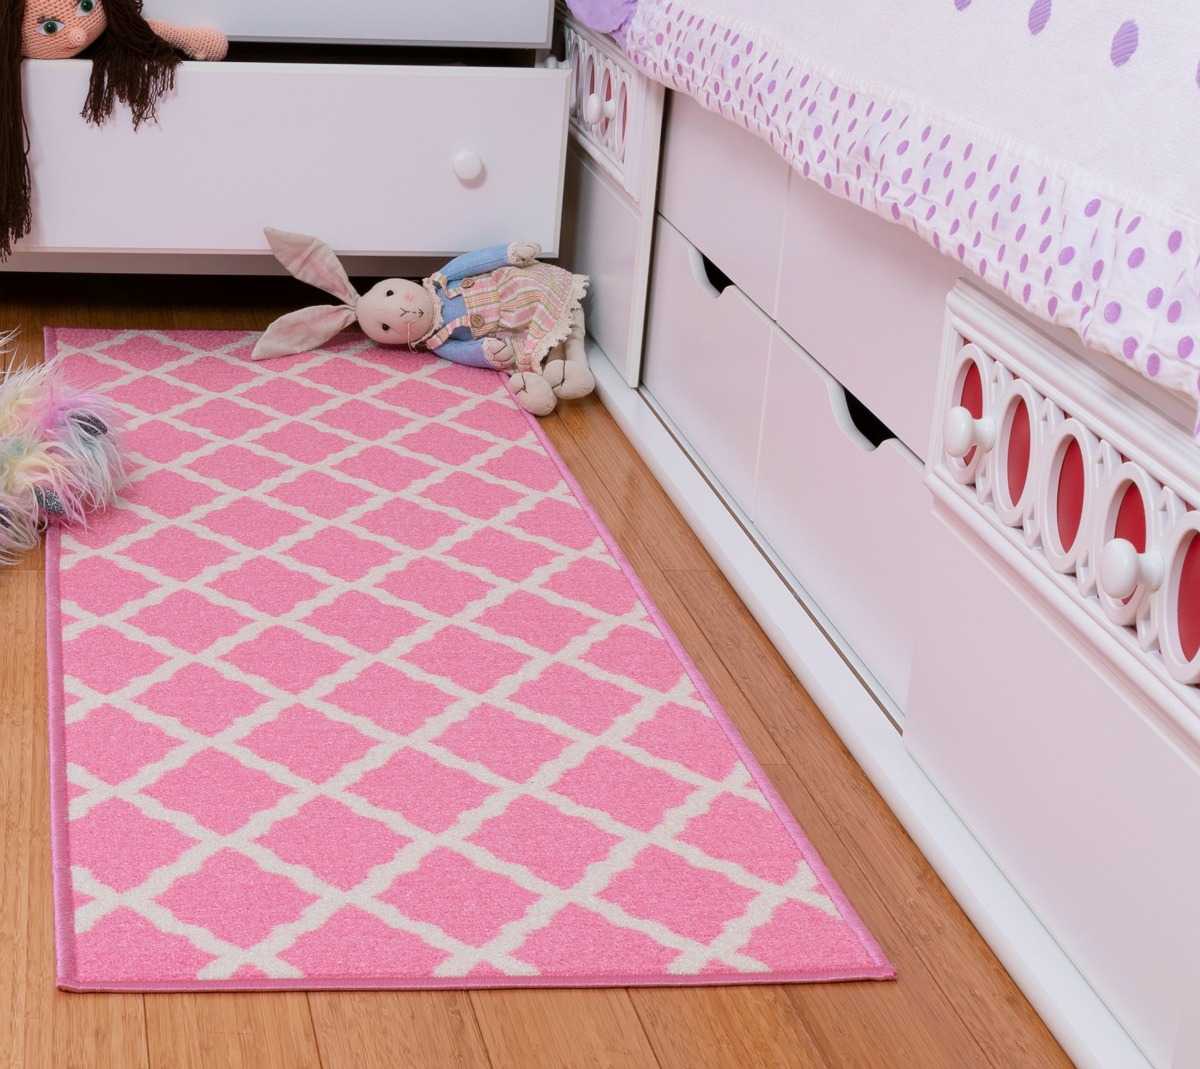 pink and white runner rug with trellis design next to a child's bed and toys